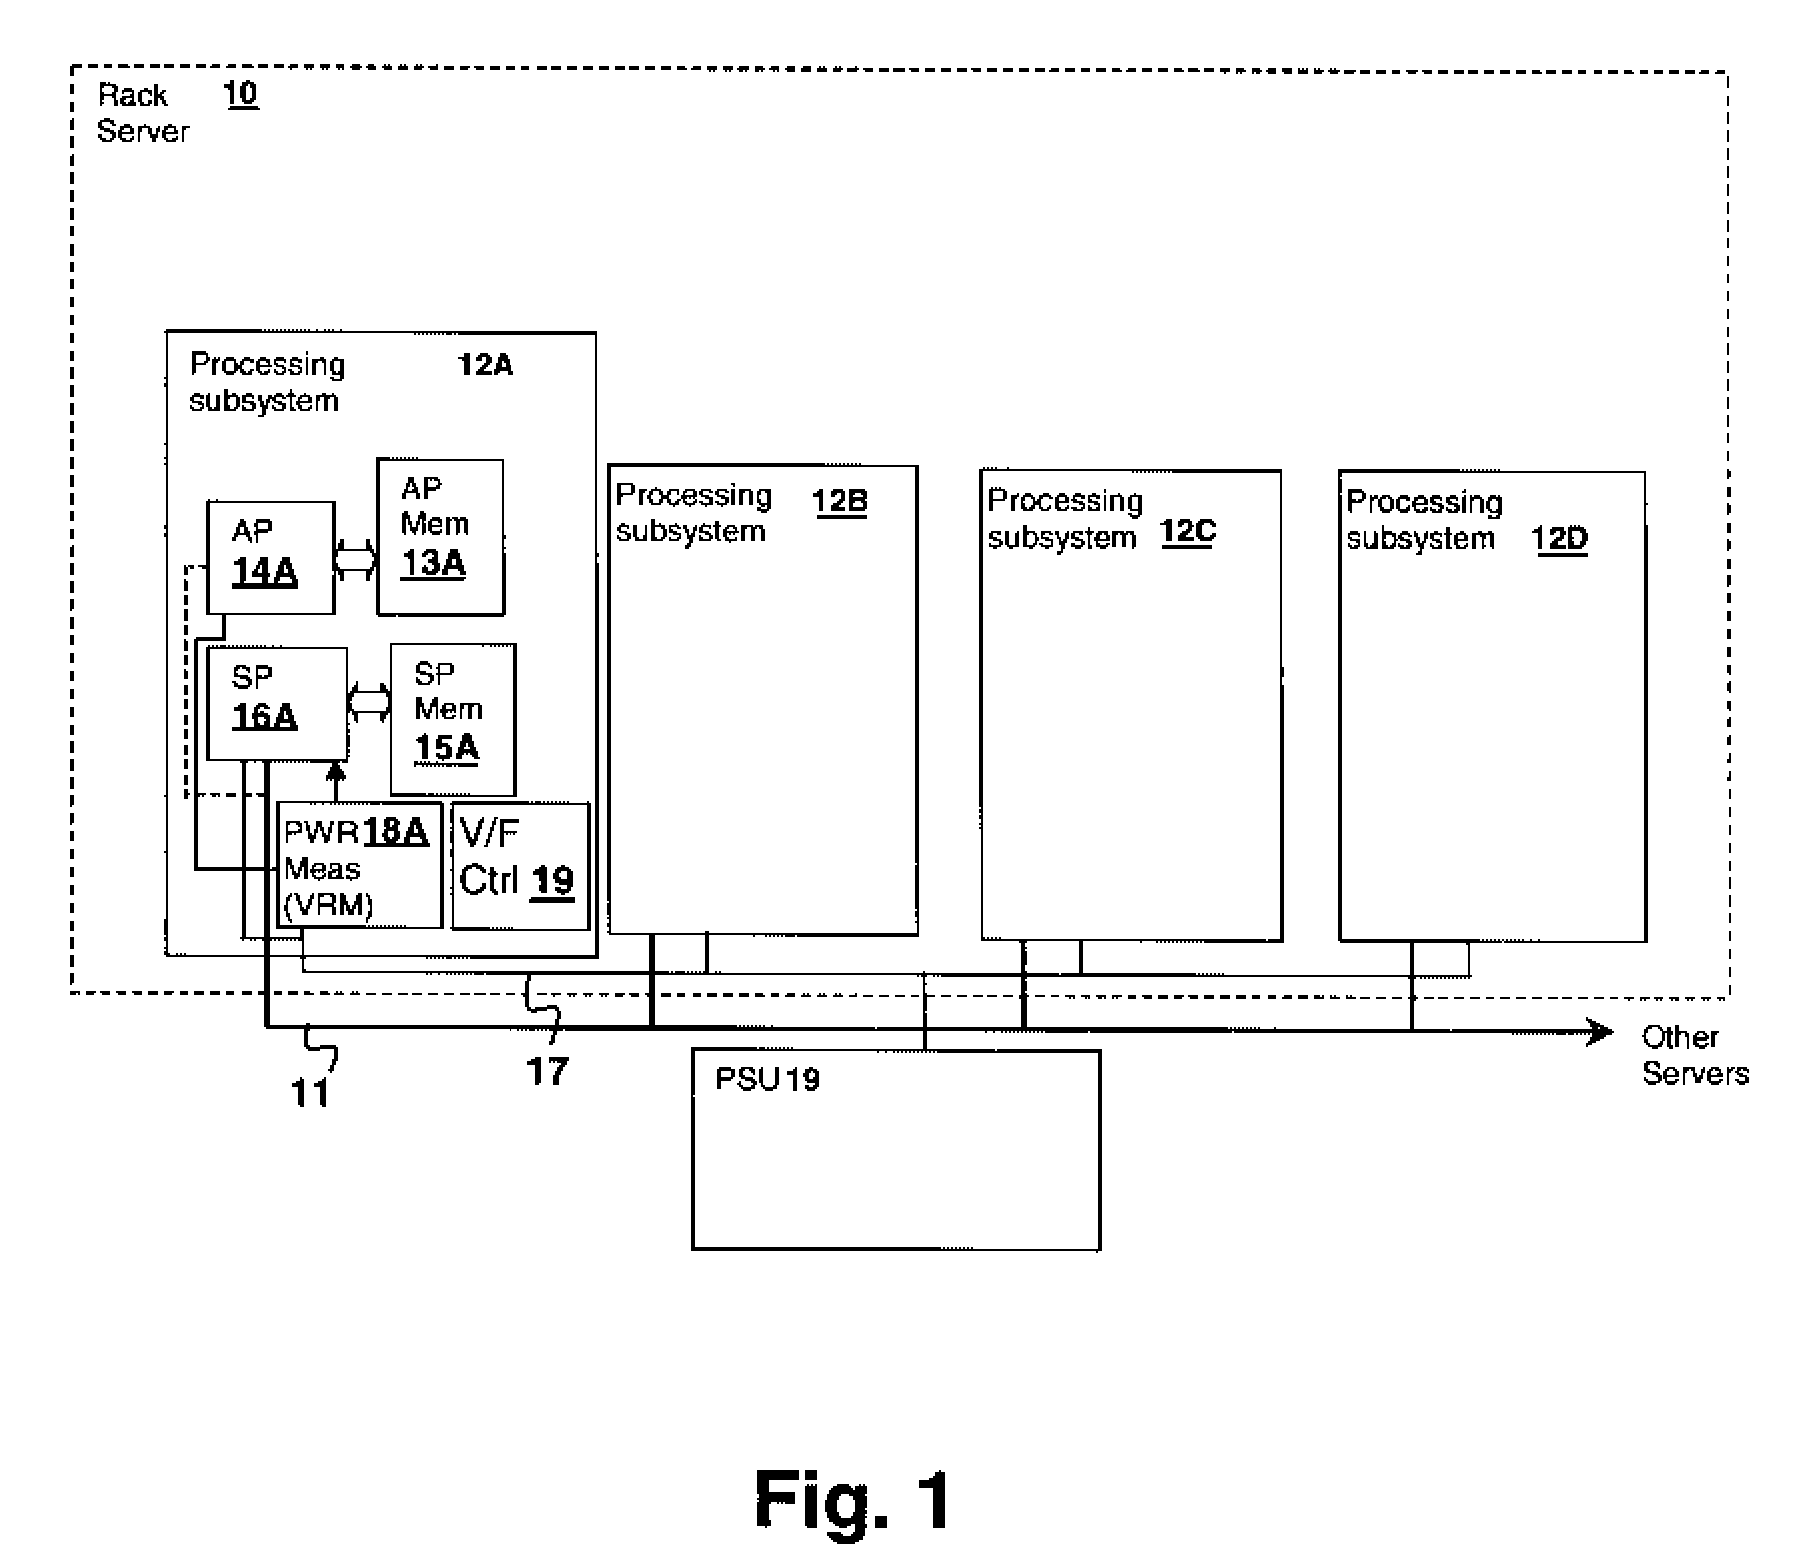 Method and System for Real-Time Prediction of Power Usage for a Change to Another Performance State